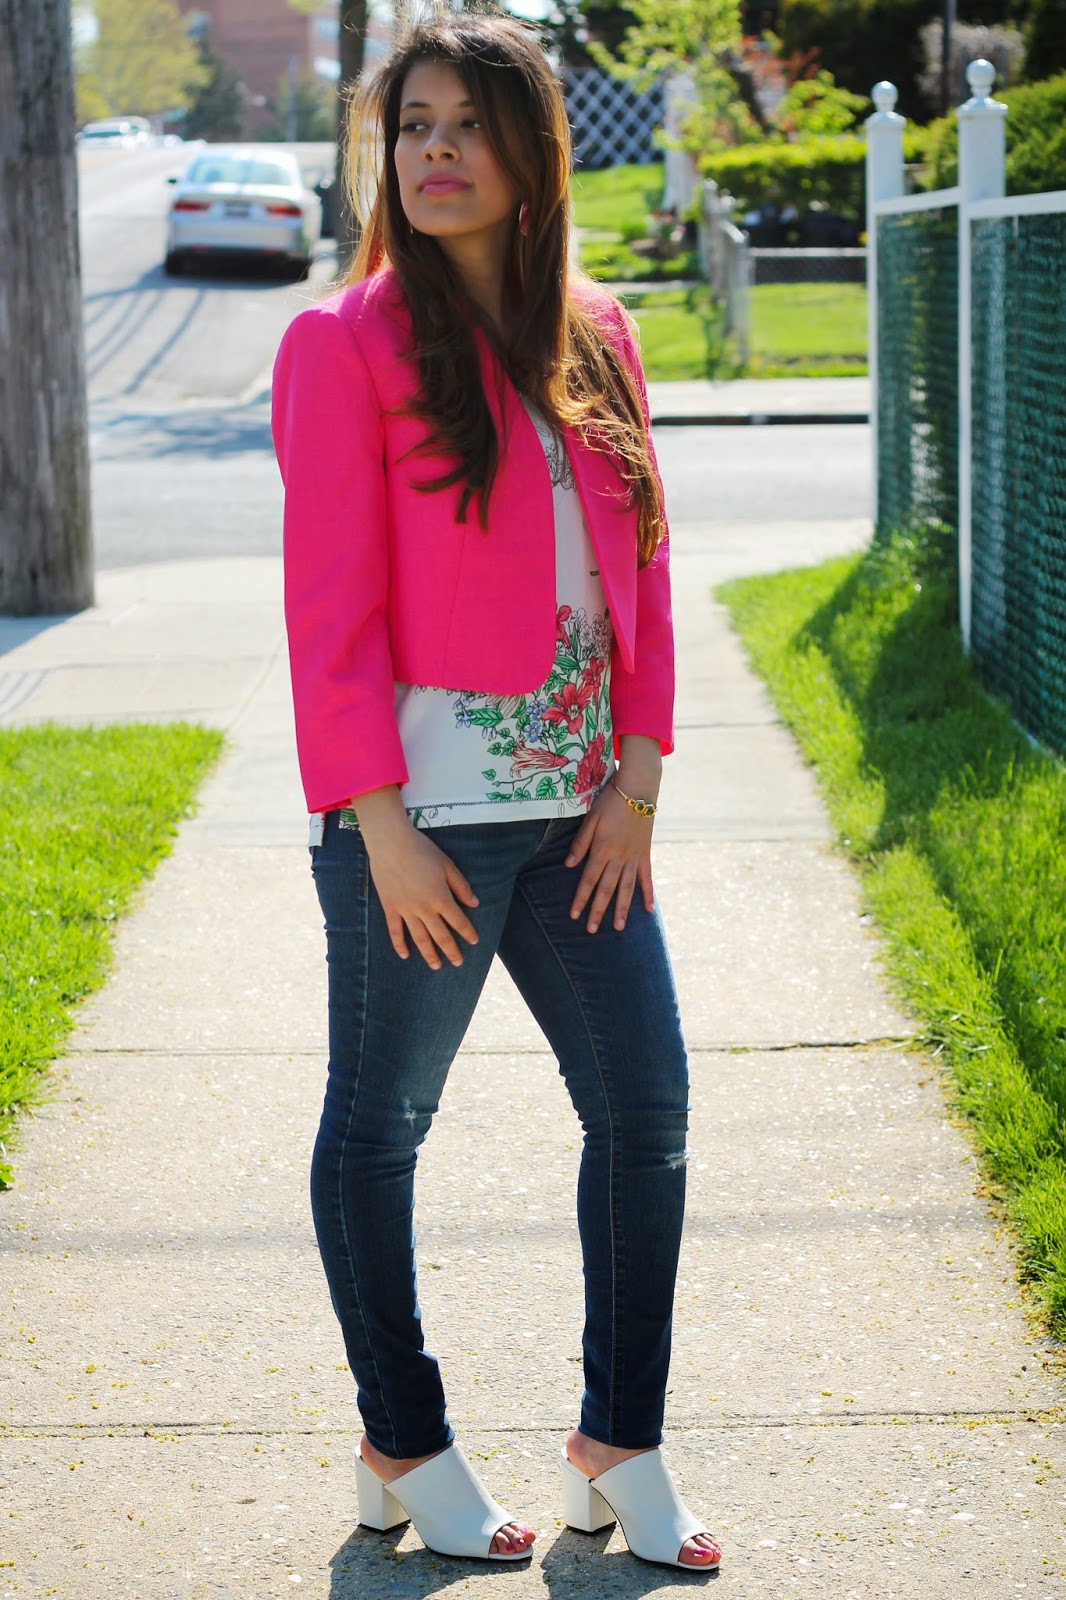 Spring Florals With A Pop of Pink